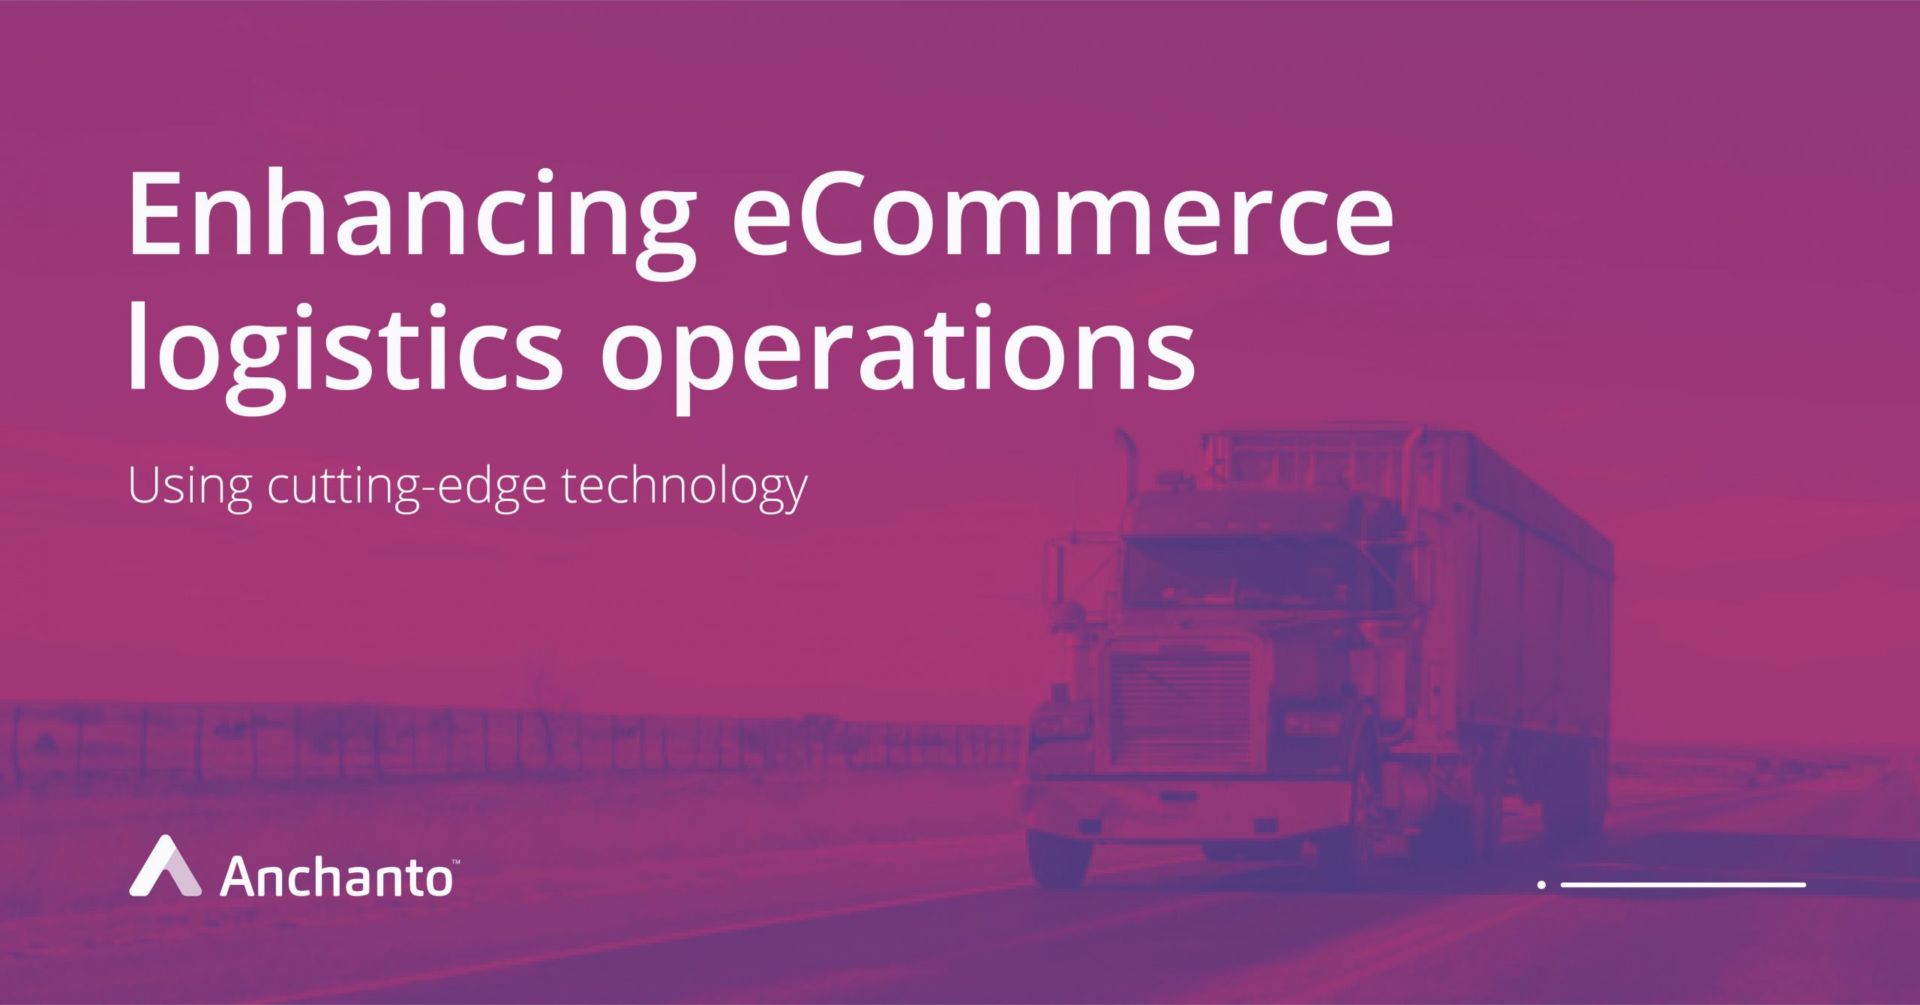 Enhancing e-commerce logistics operations with cutting-edge technology